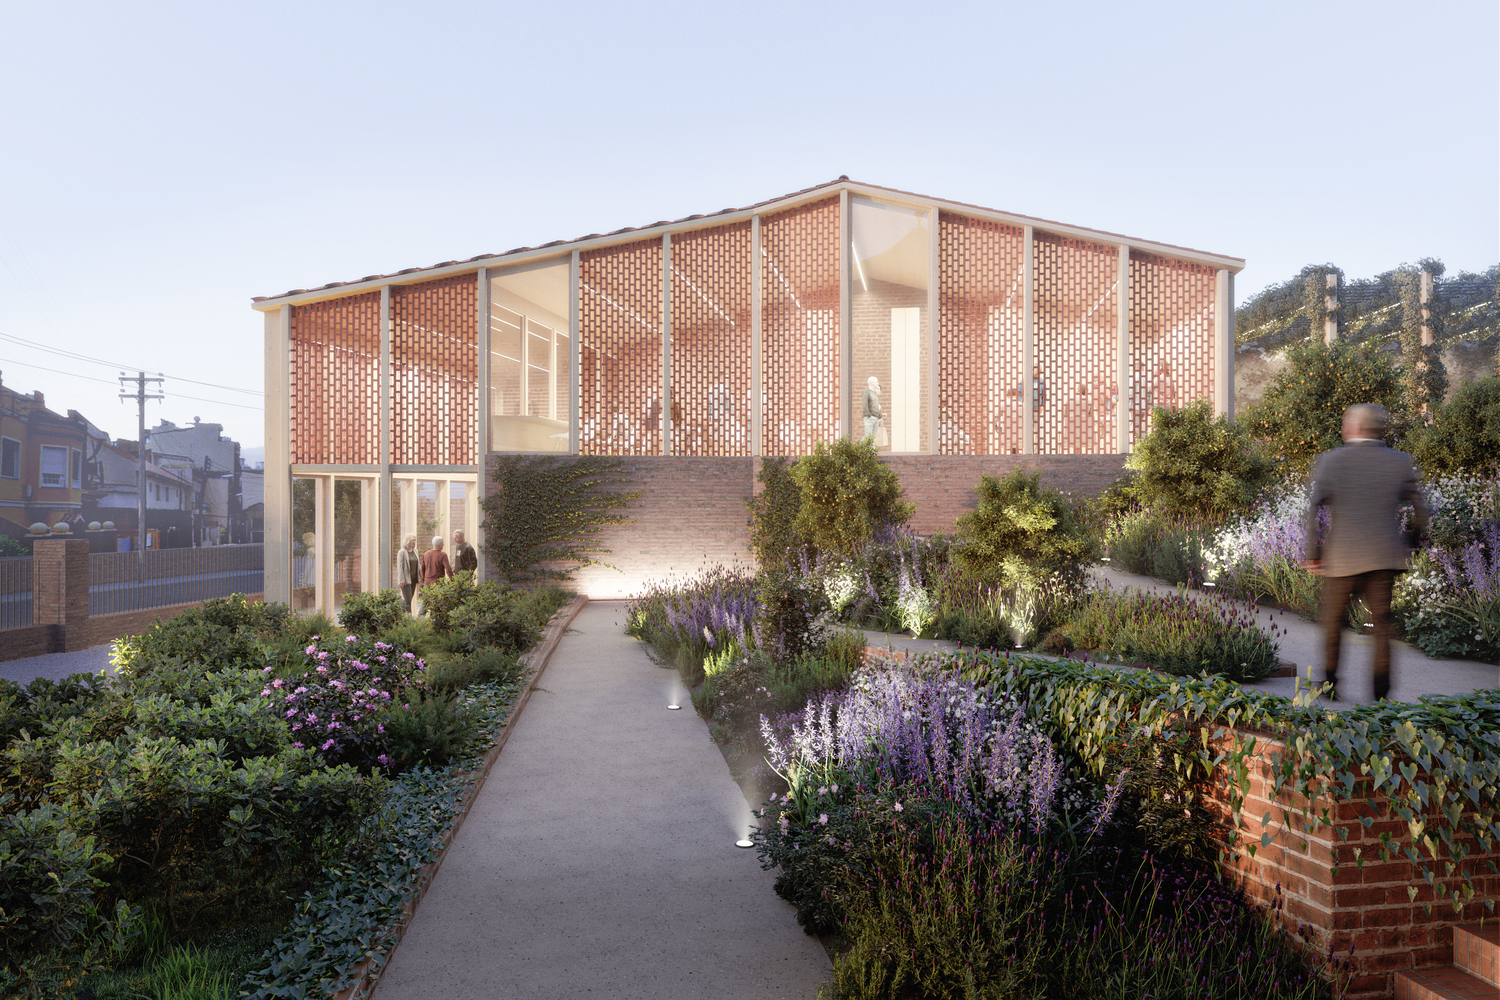 Fourth prize in the Can Garcini competition in Guinardó district of Barcelona! Renovation and expansion to build an elderly day center. - Garcés - de Seta - Bonet